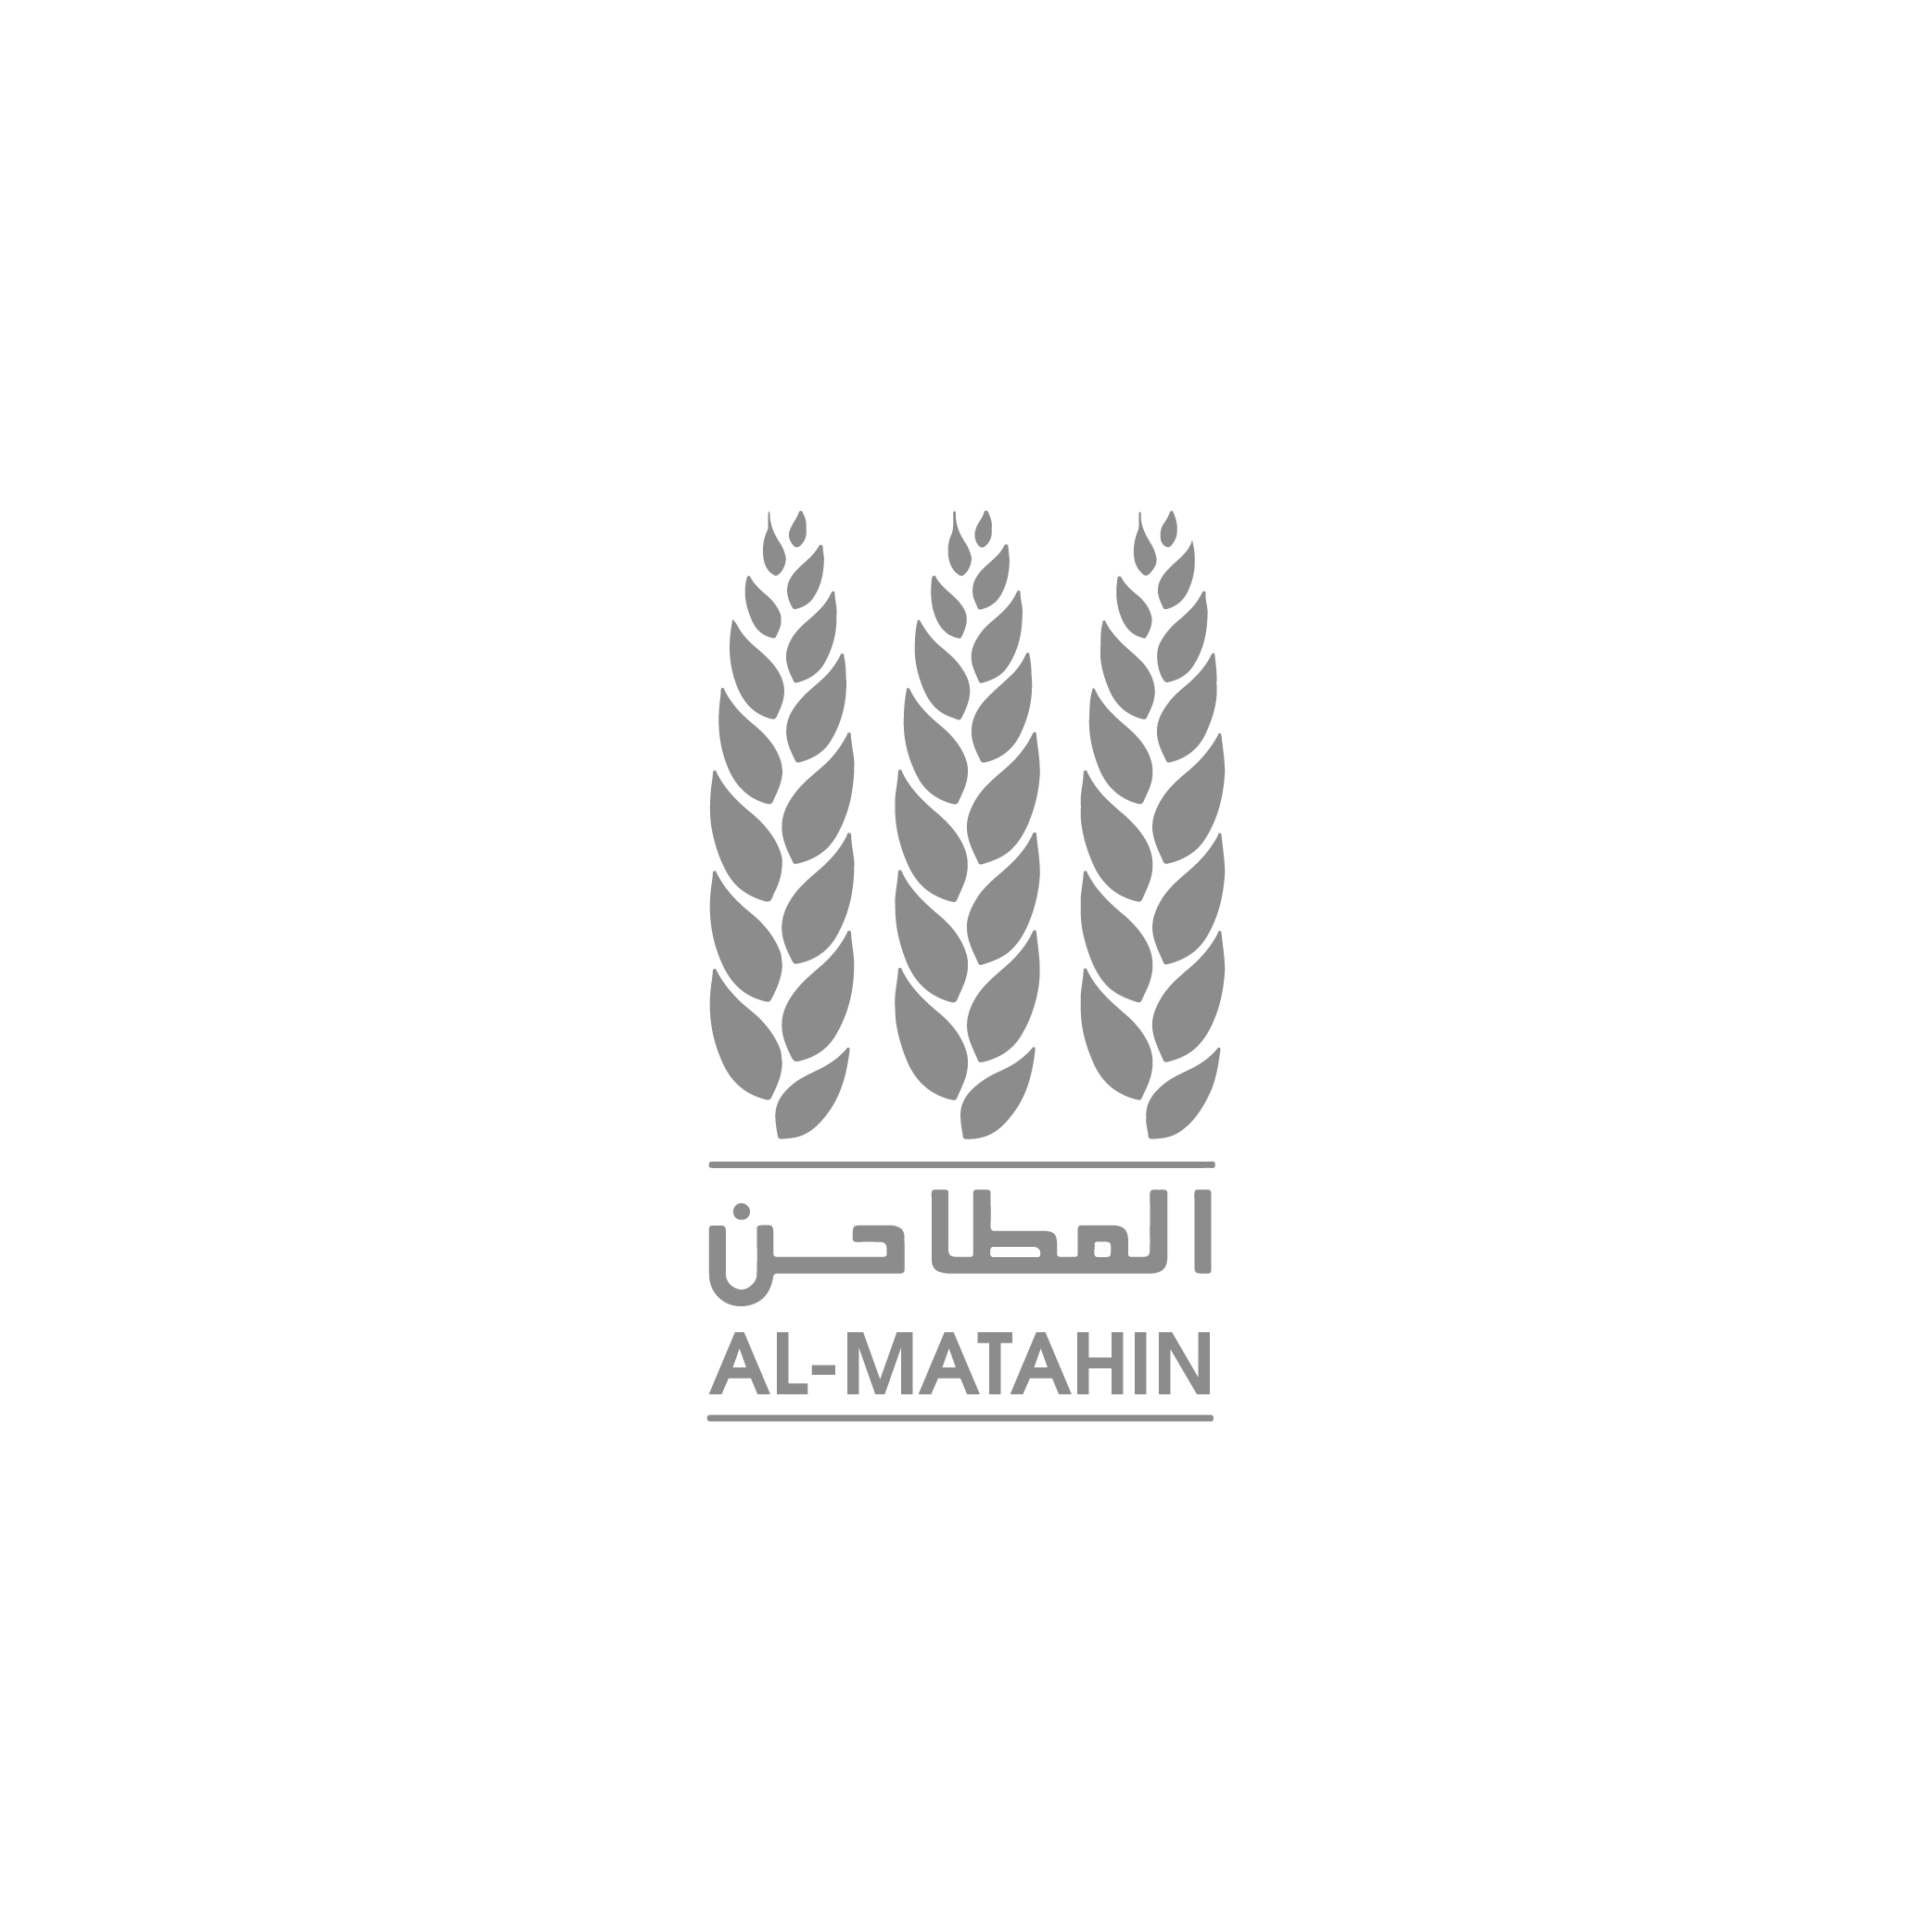 Al Matahin: Importing of Australian Wheat Consignment on May and June